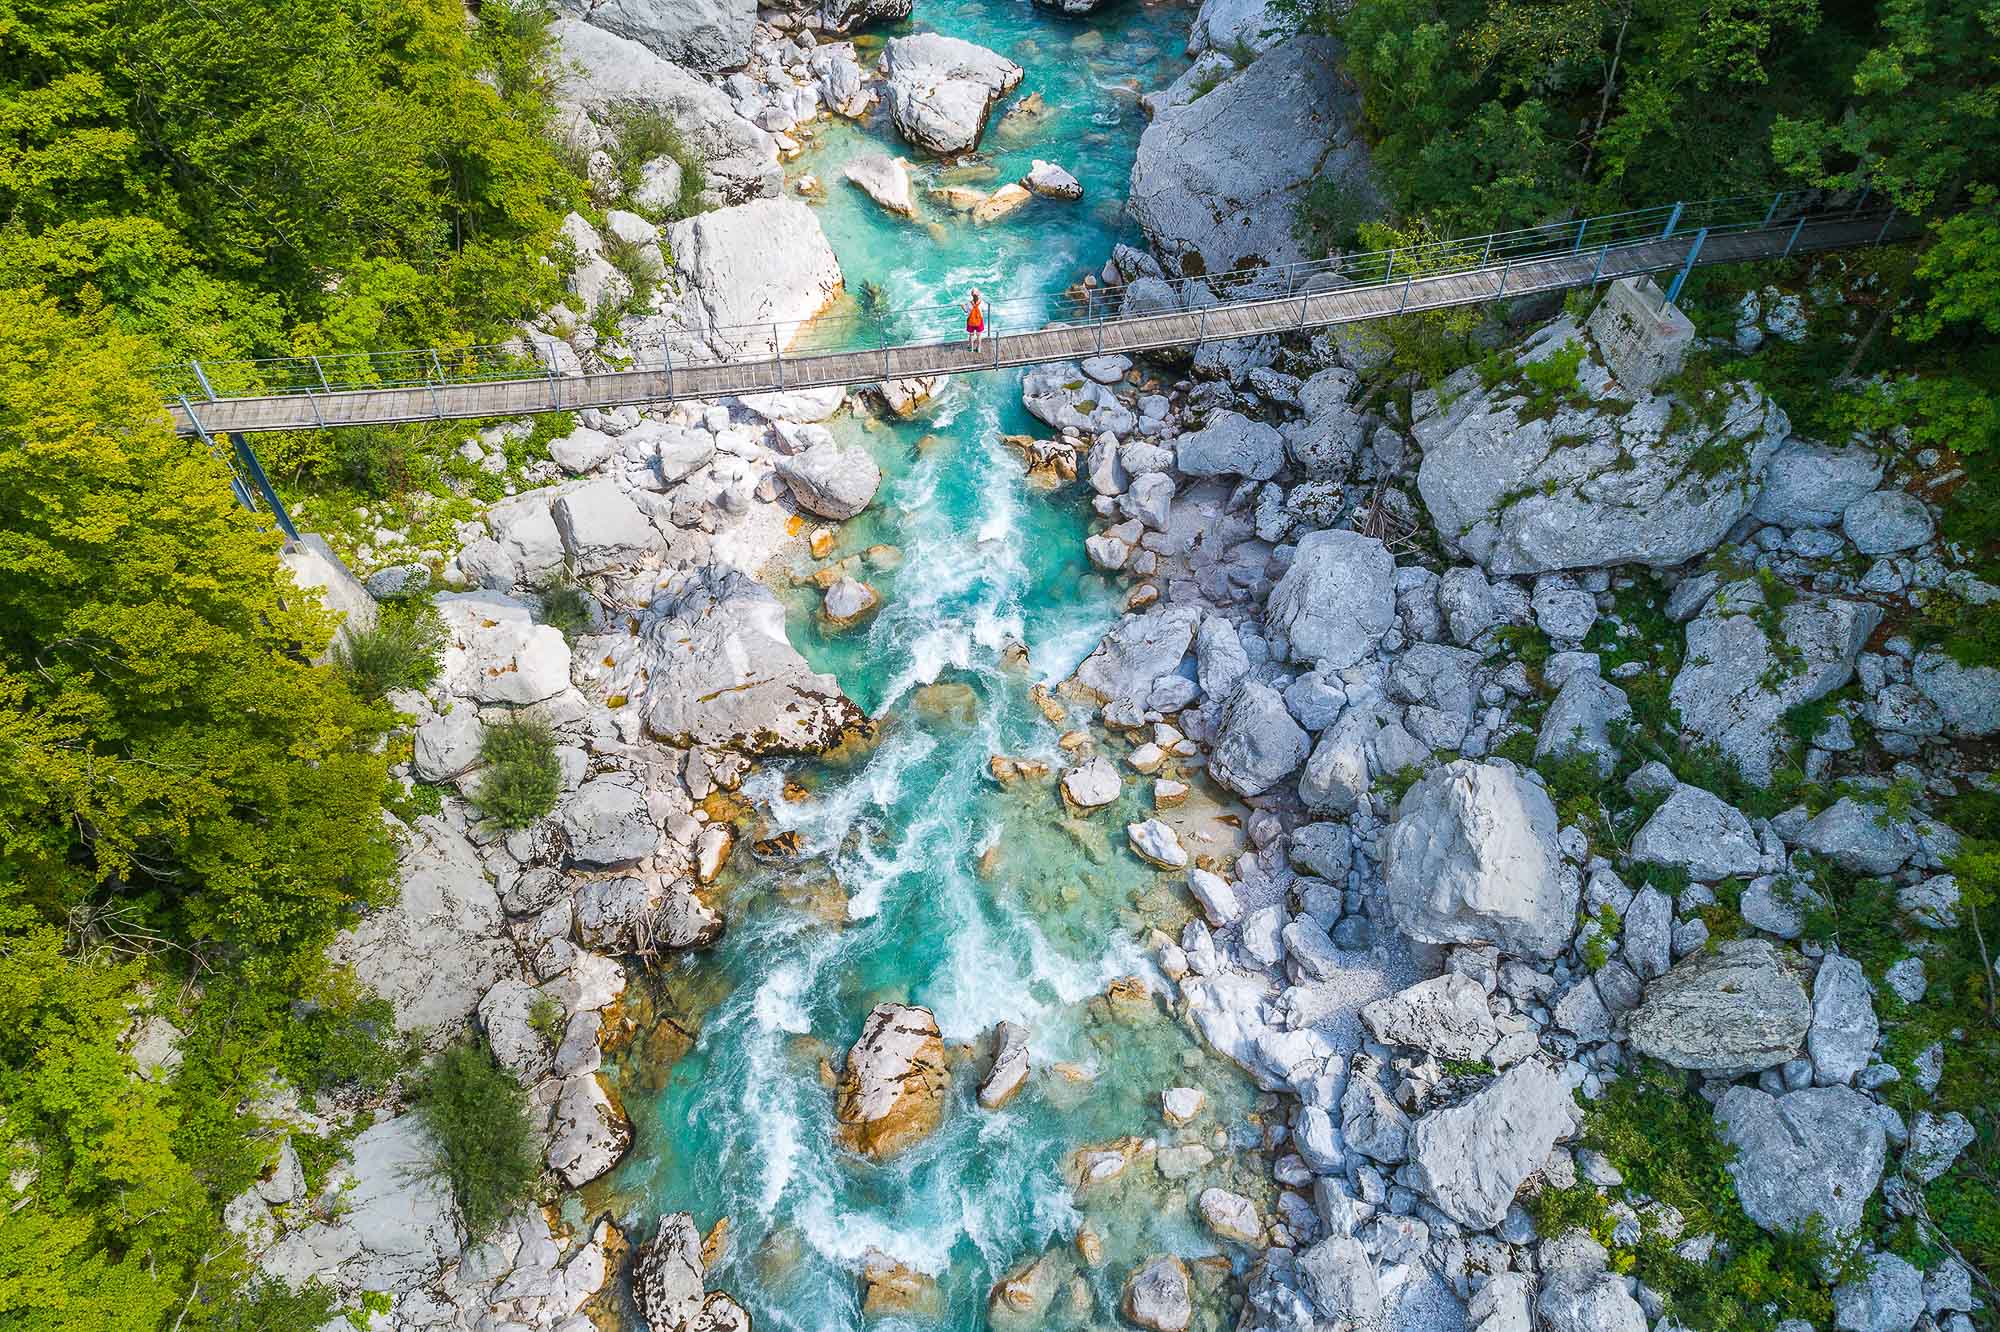 An aerial shot of a girl crossing a bridge over the Soca River on the way to Kozjak waterfall in Soca valley in Slovenia